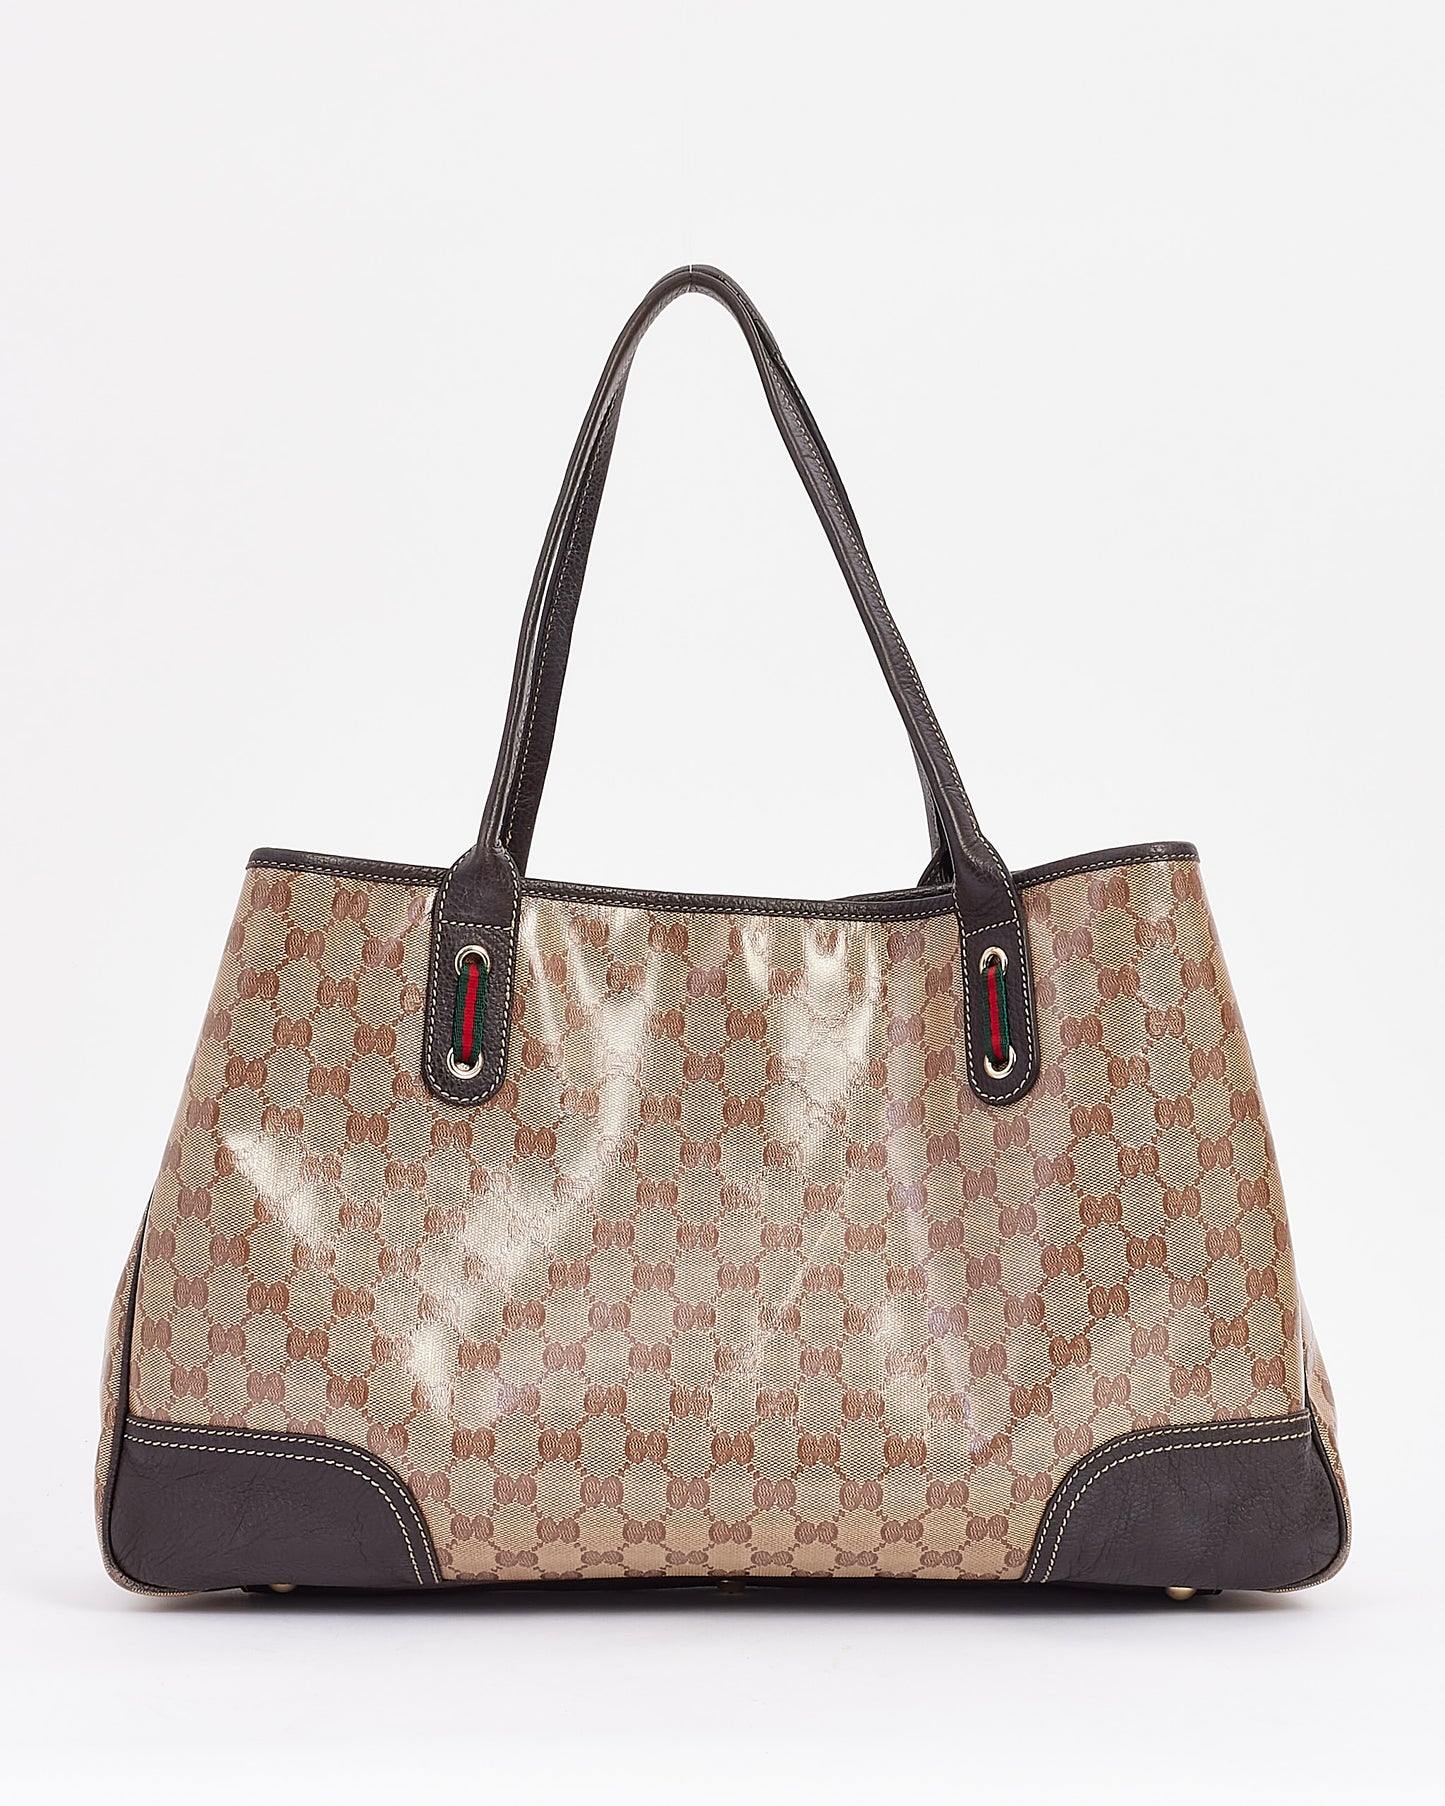 Gucci Brown GG Supreme Canvas Large Crystal Tote